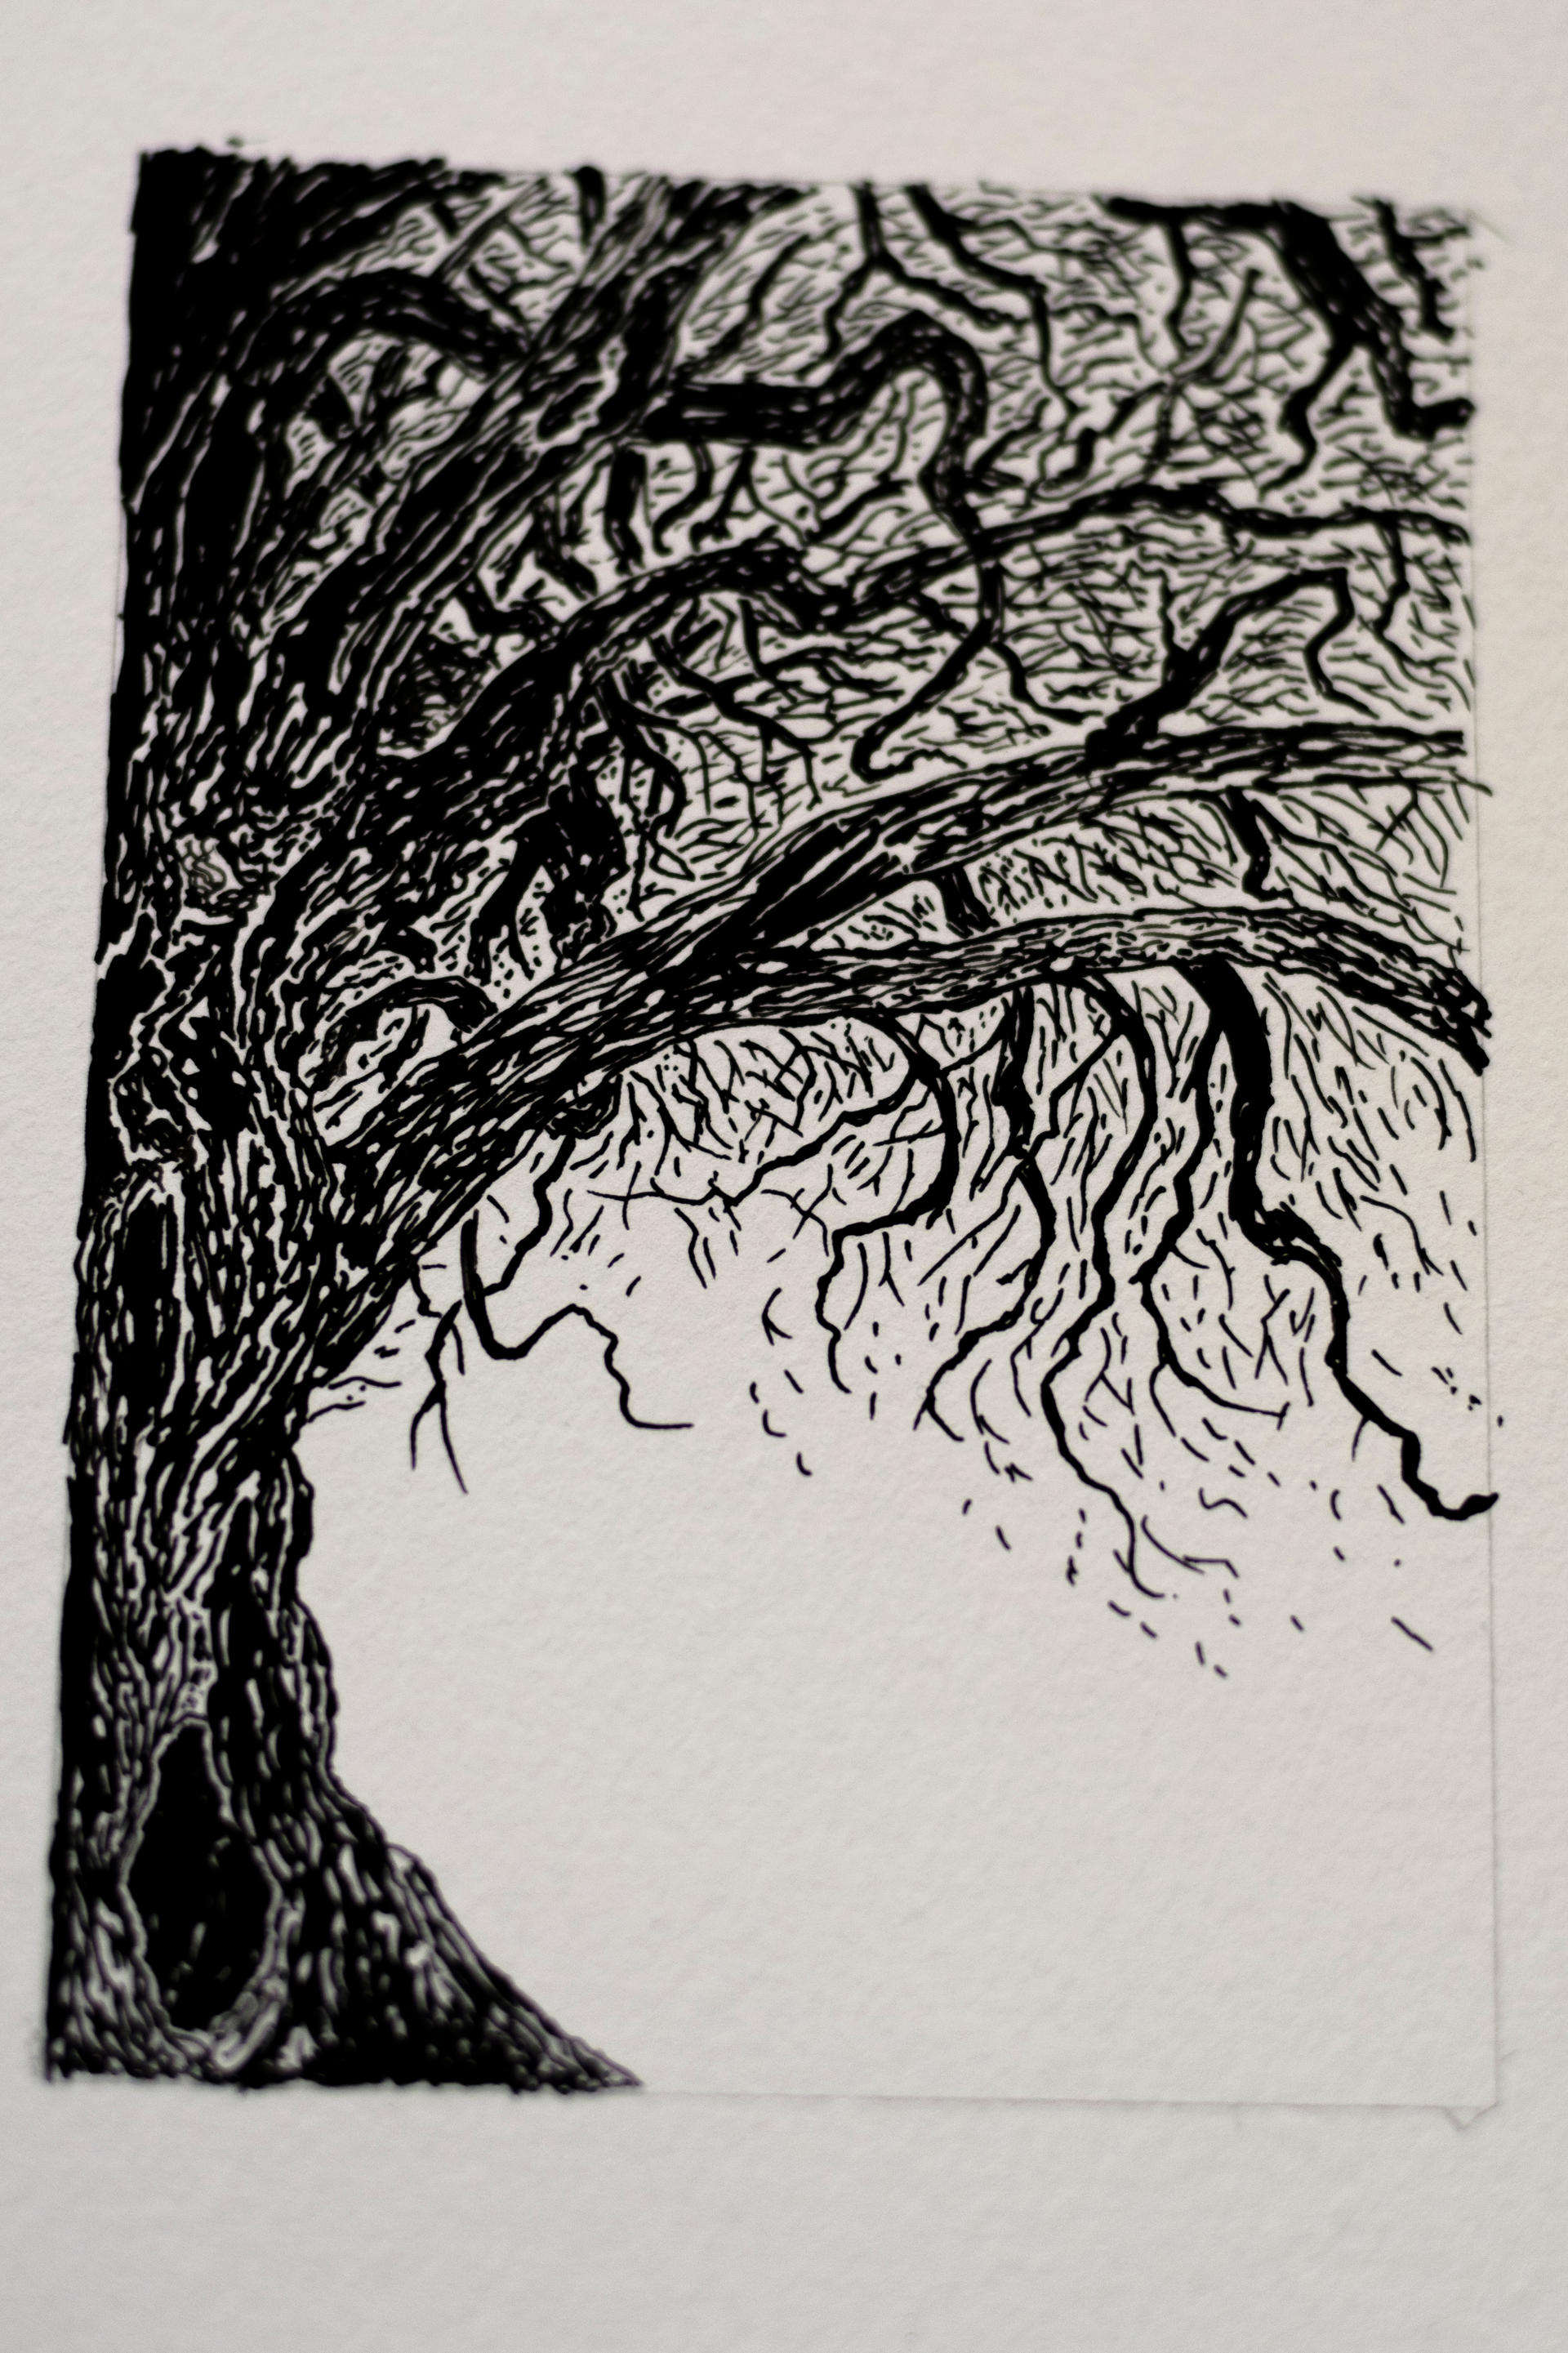 Mourning Tree by NMatychuk on DeviantArt